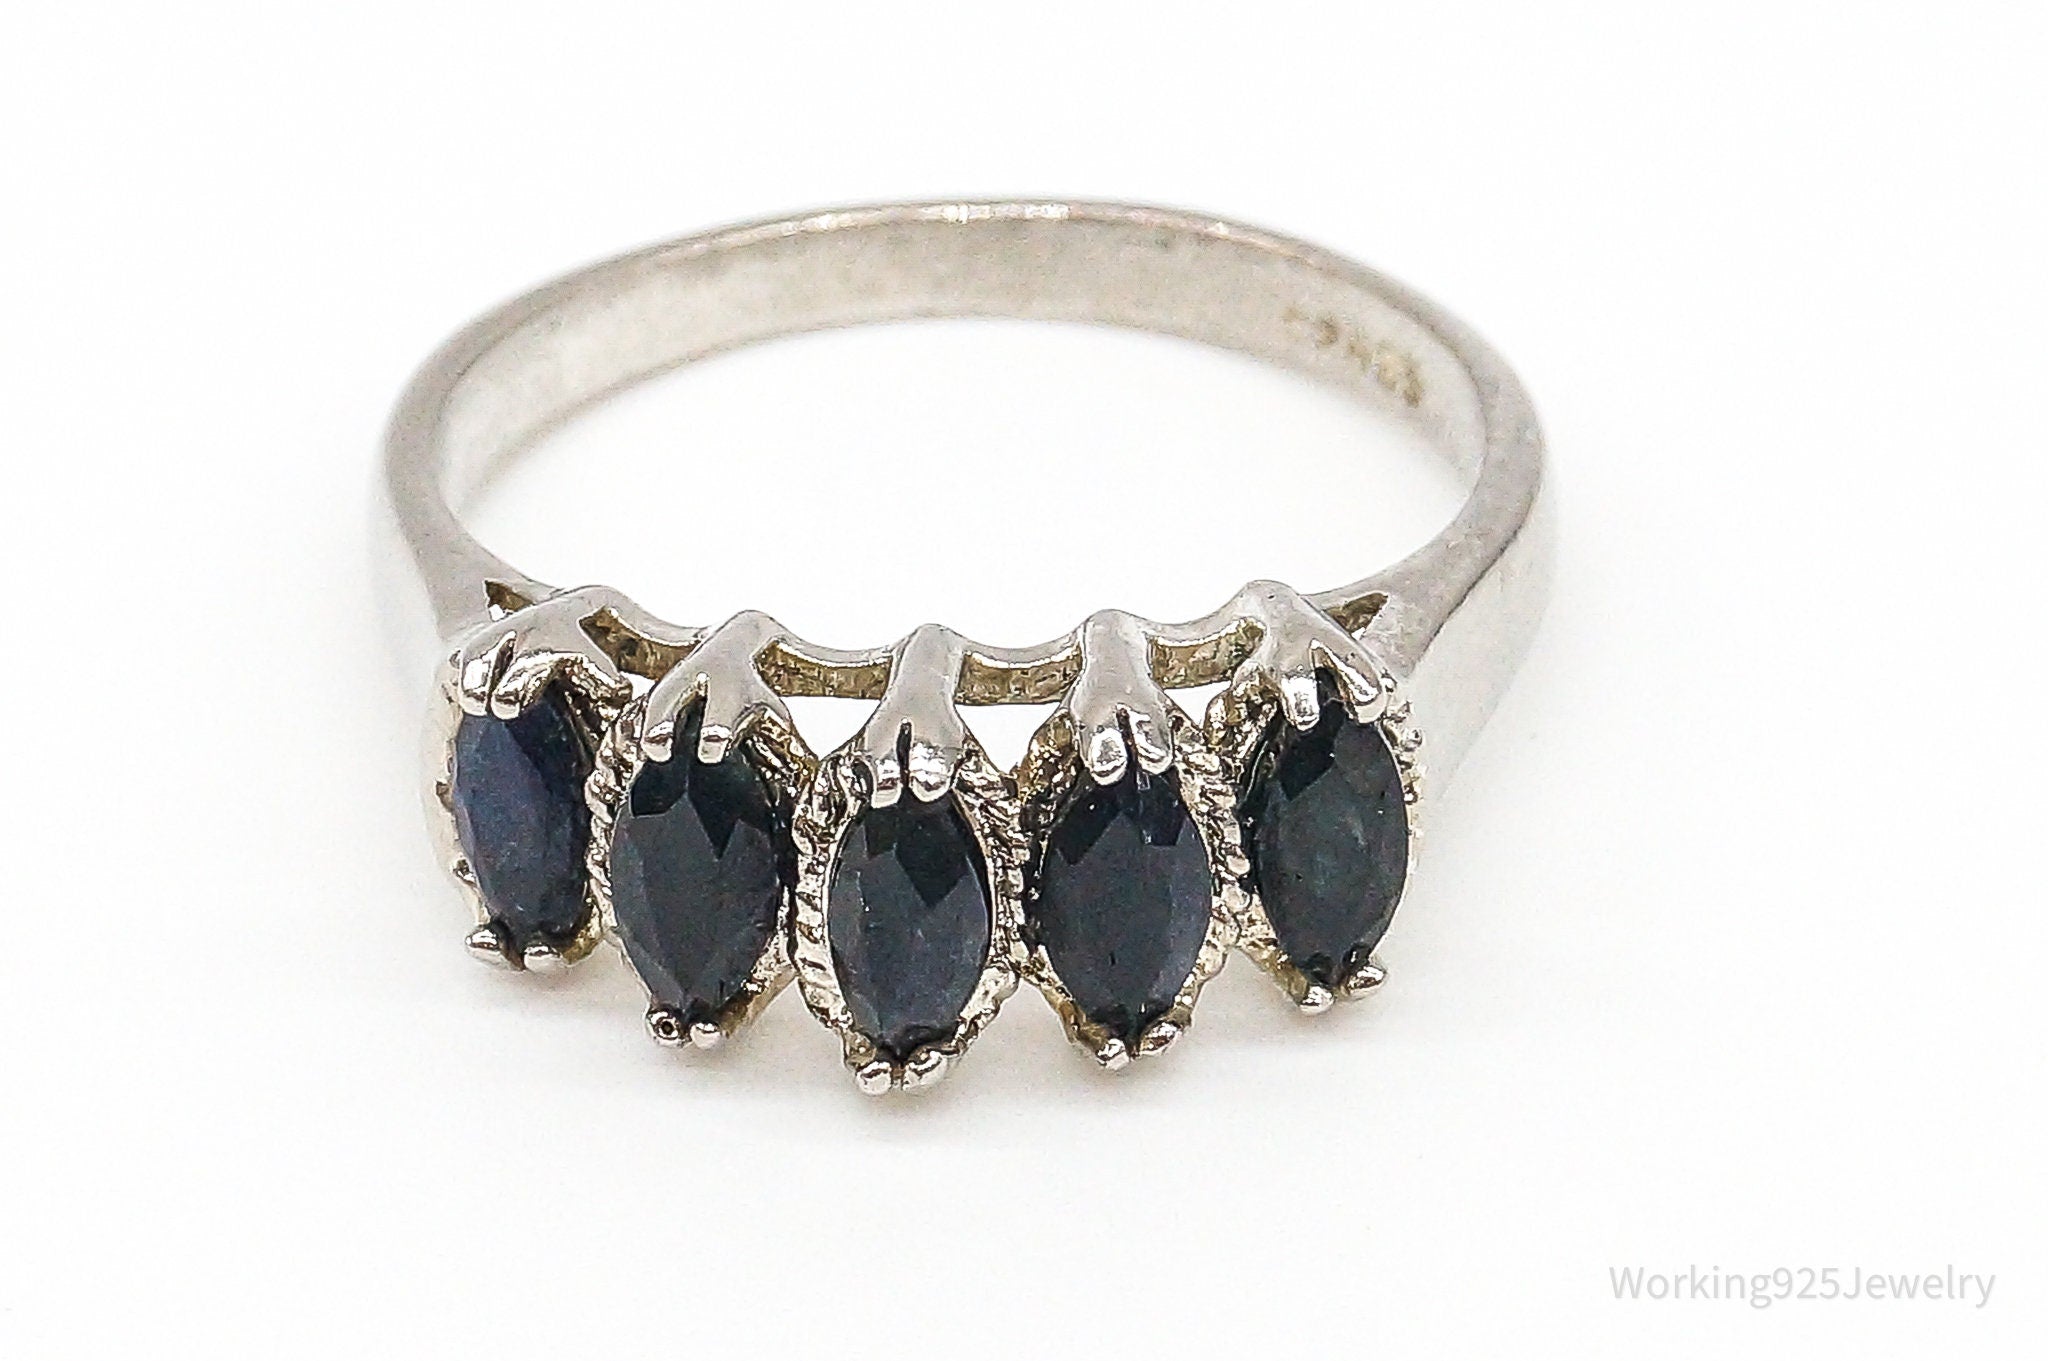 Vintage Art Deco Sapphire Sterling Silver Ring - Size 10.25